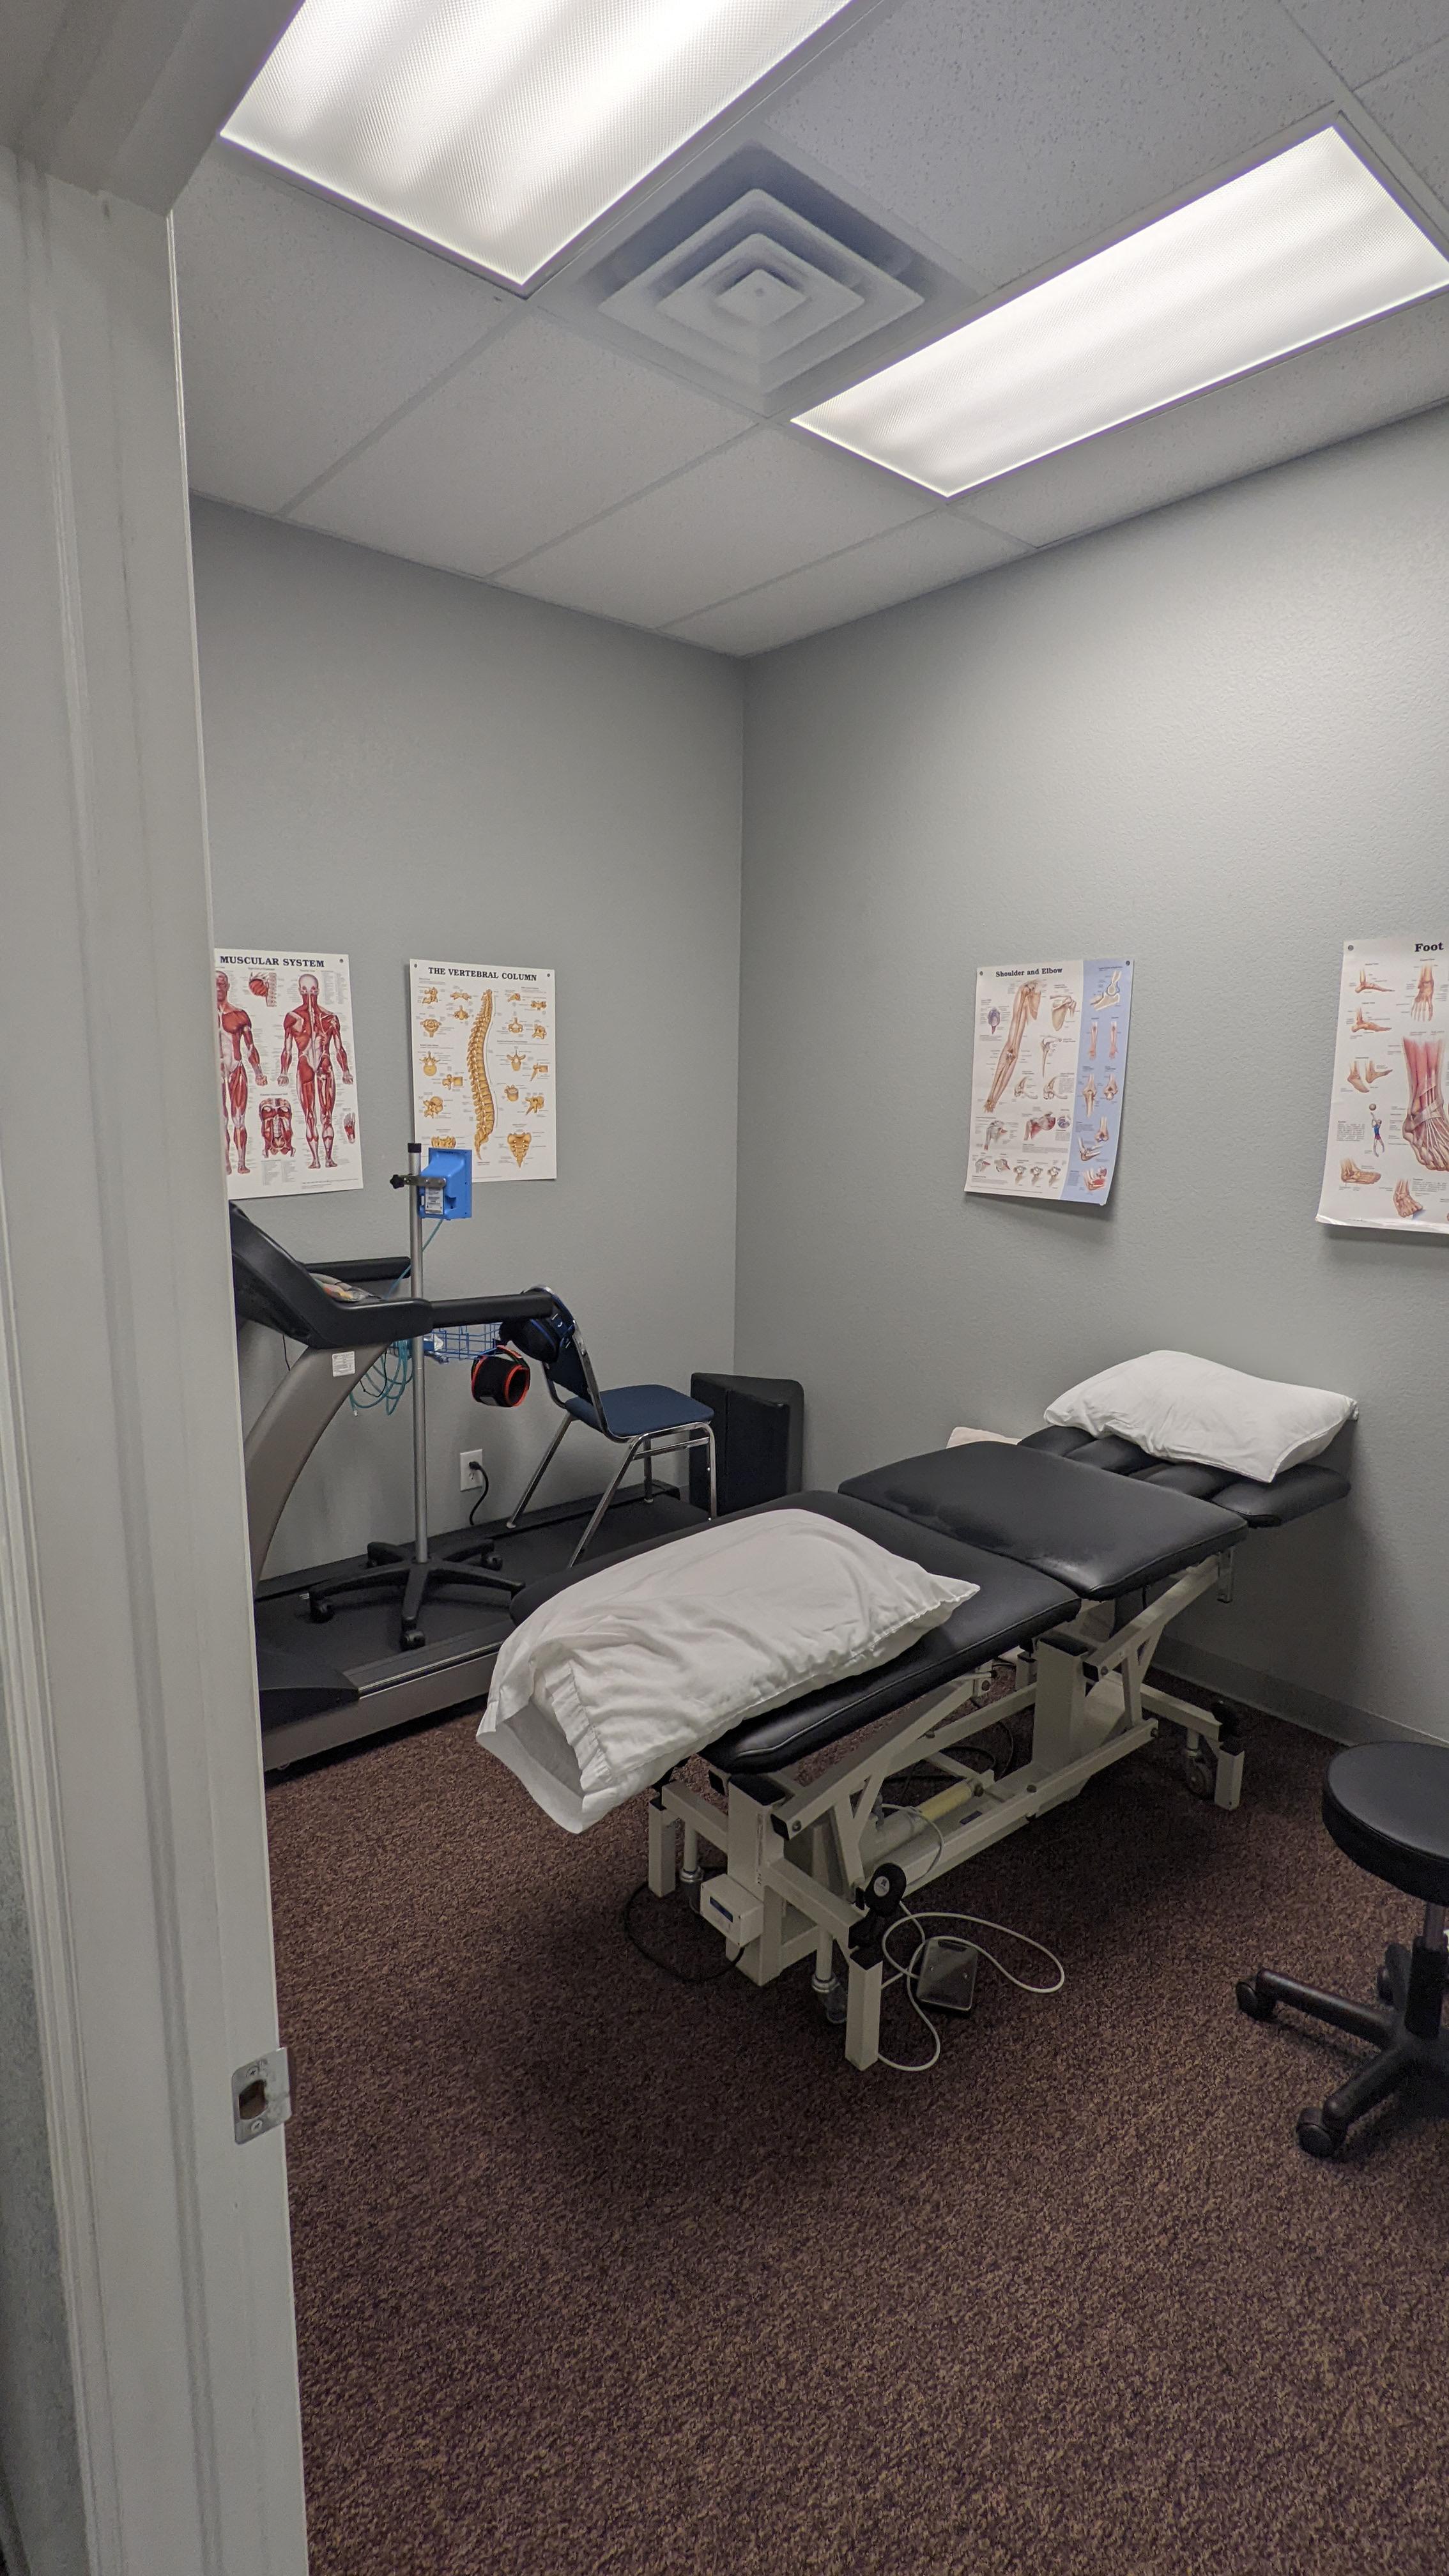 Pro Active Physical Therapy - Eaton
201 S Elm Ave
Ste. 203
Eaton, CO 80615